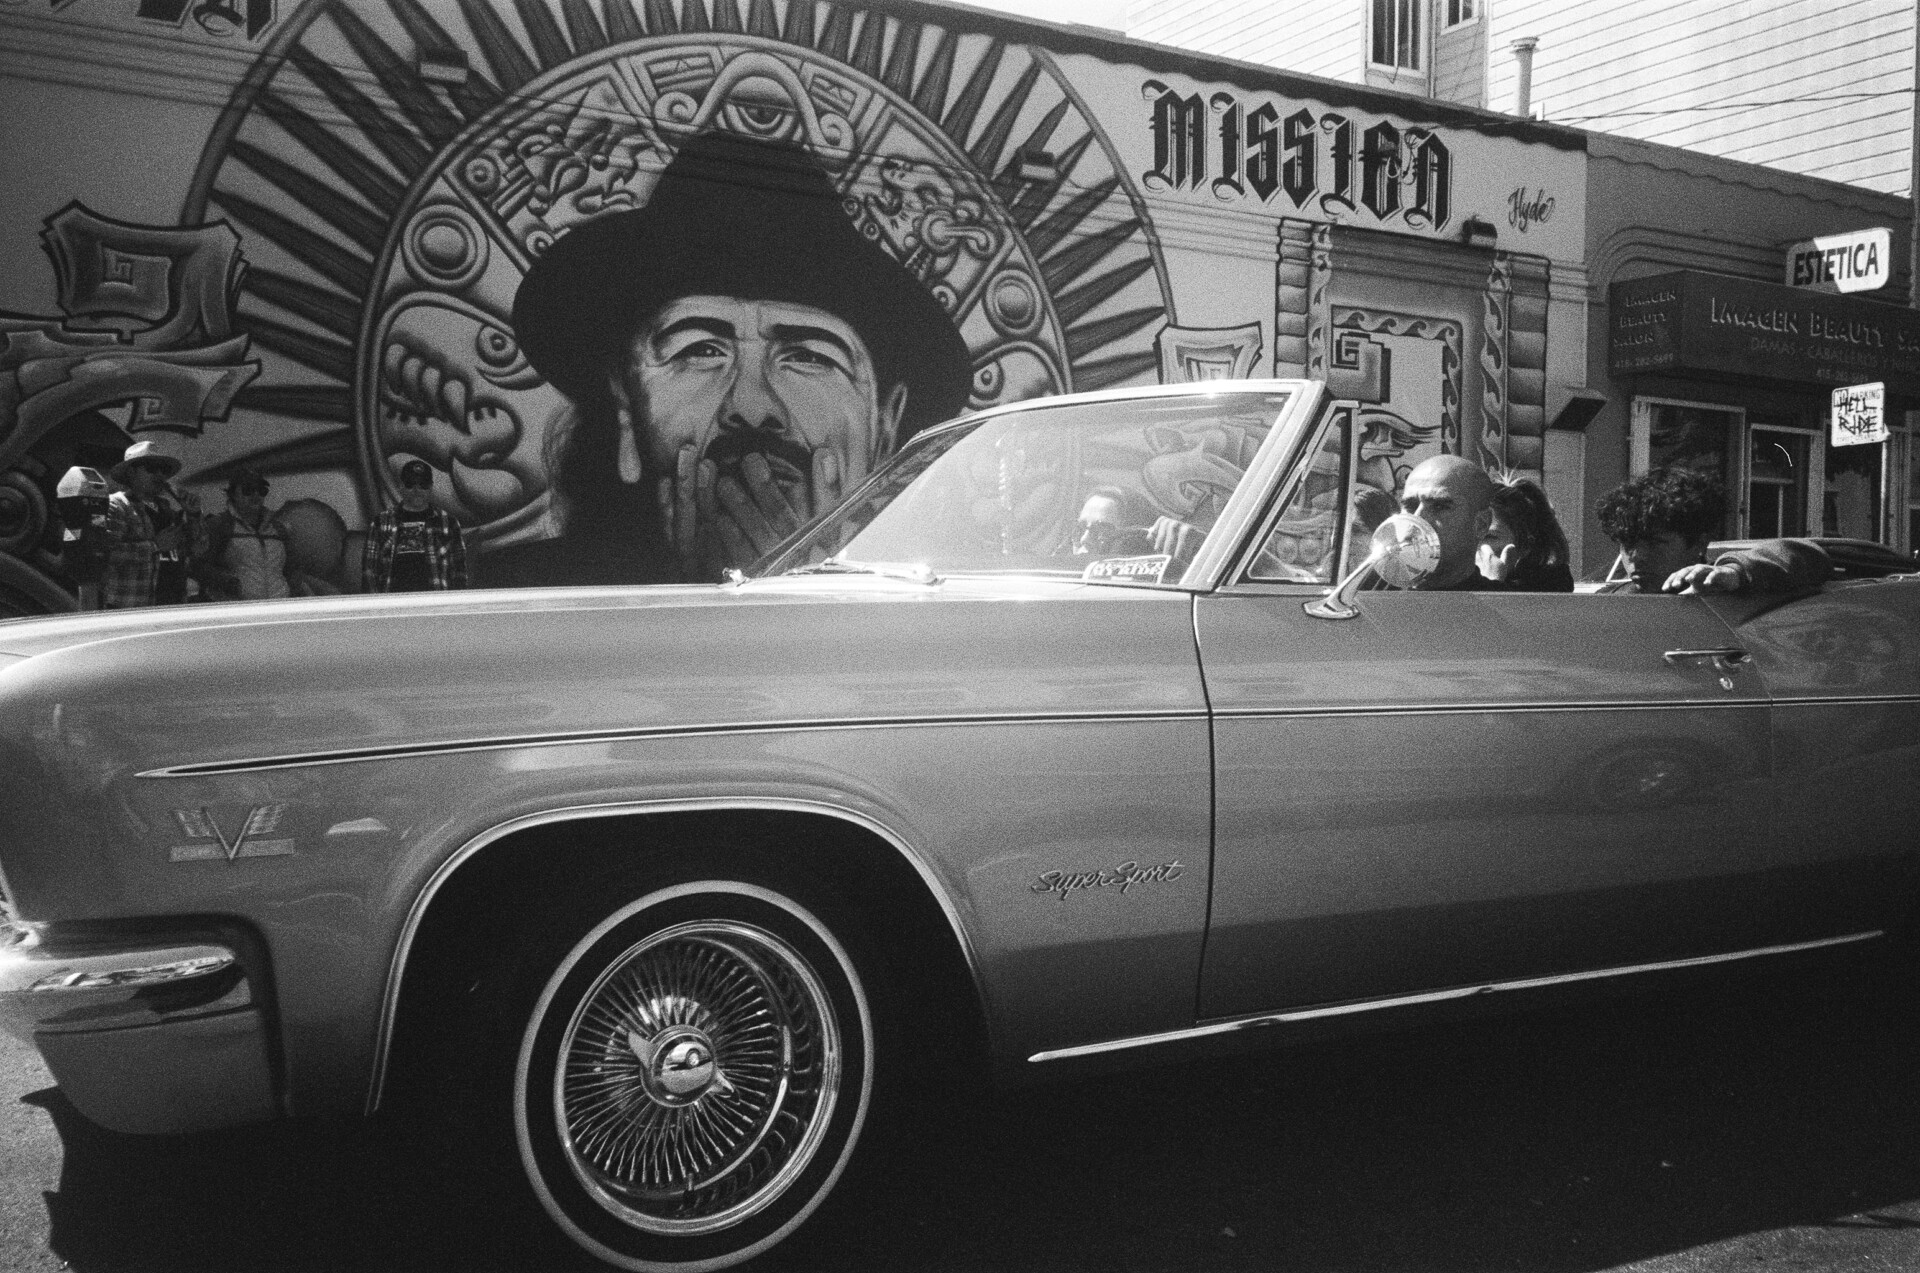 A packed lowrider car drives past a painted wall with a man's face and the word "Mission" painted on it